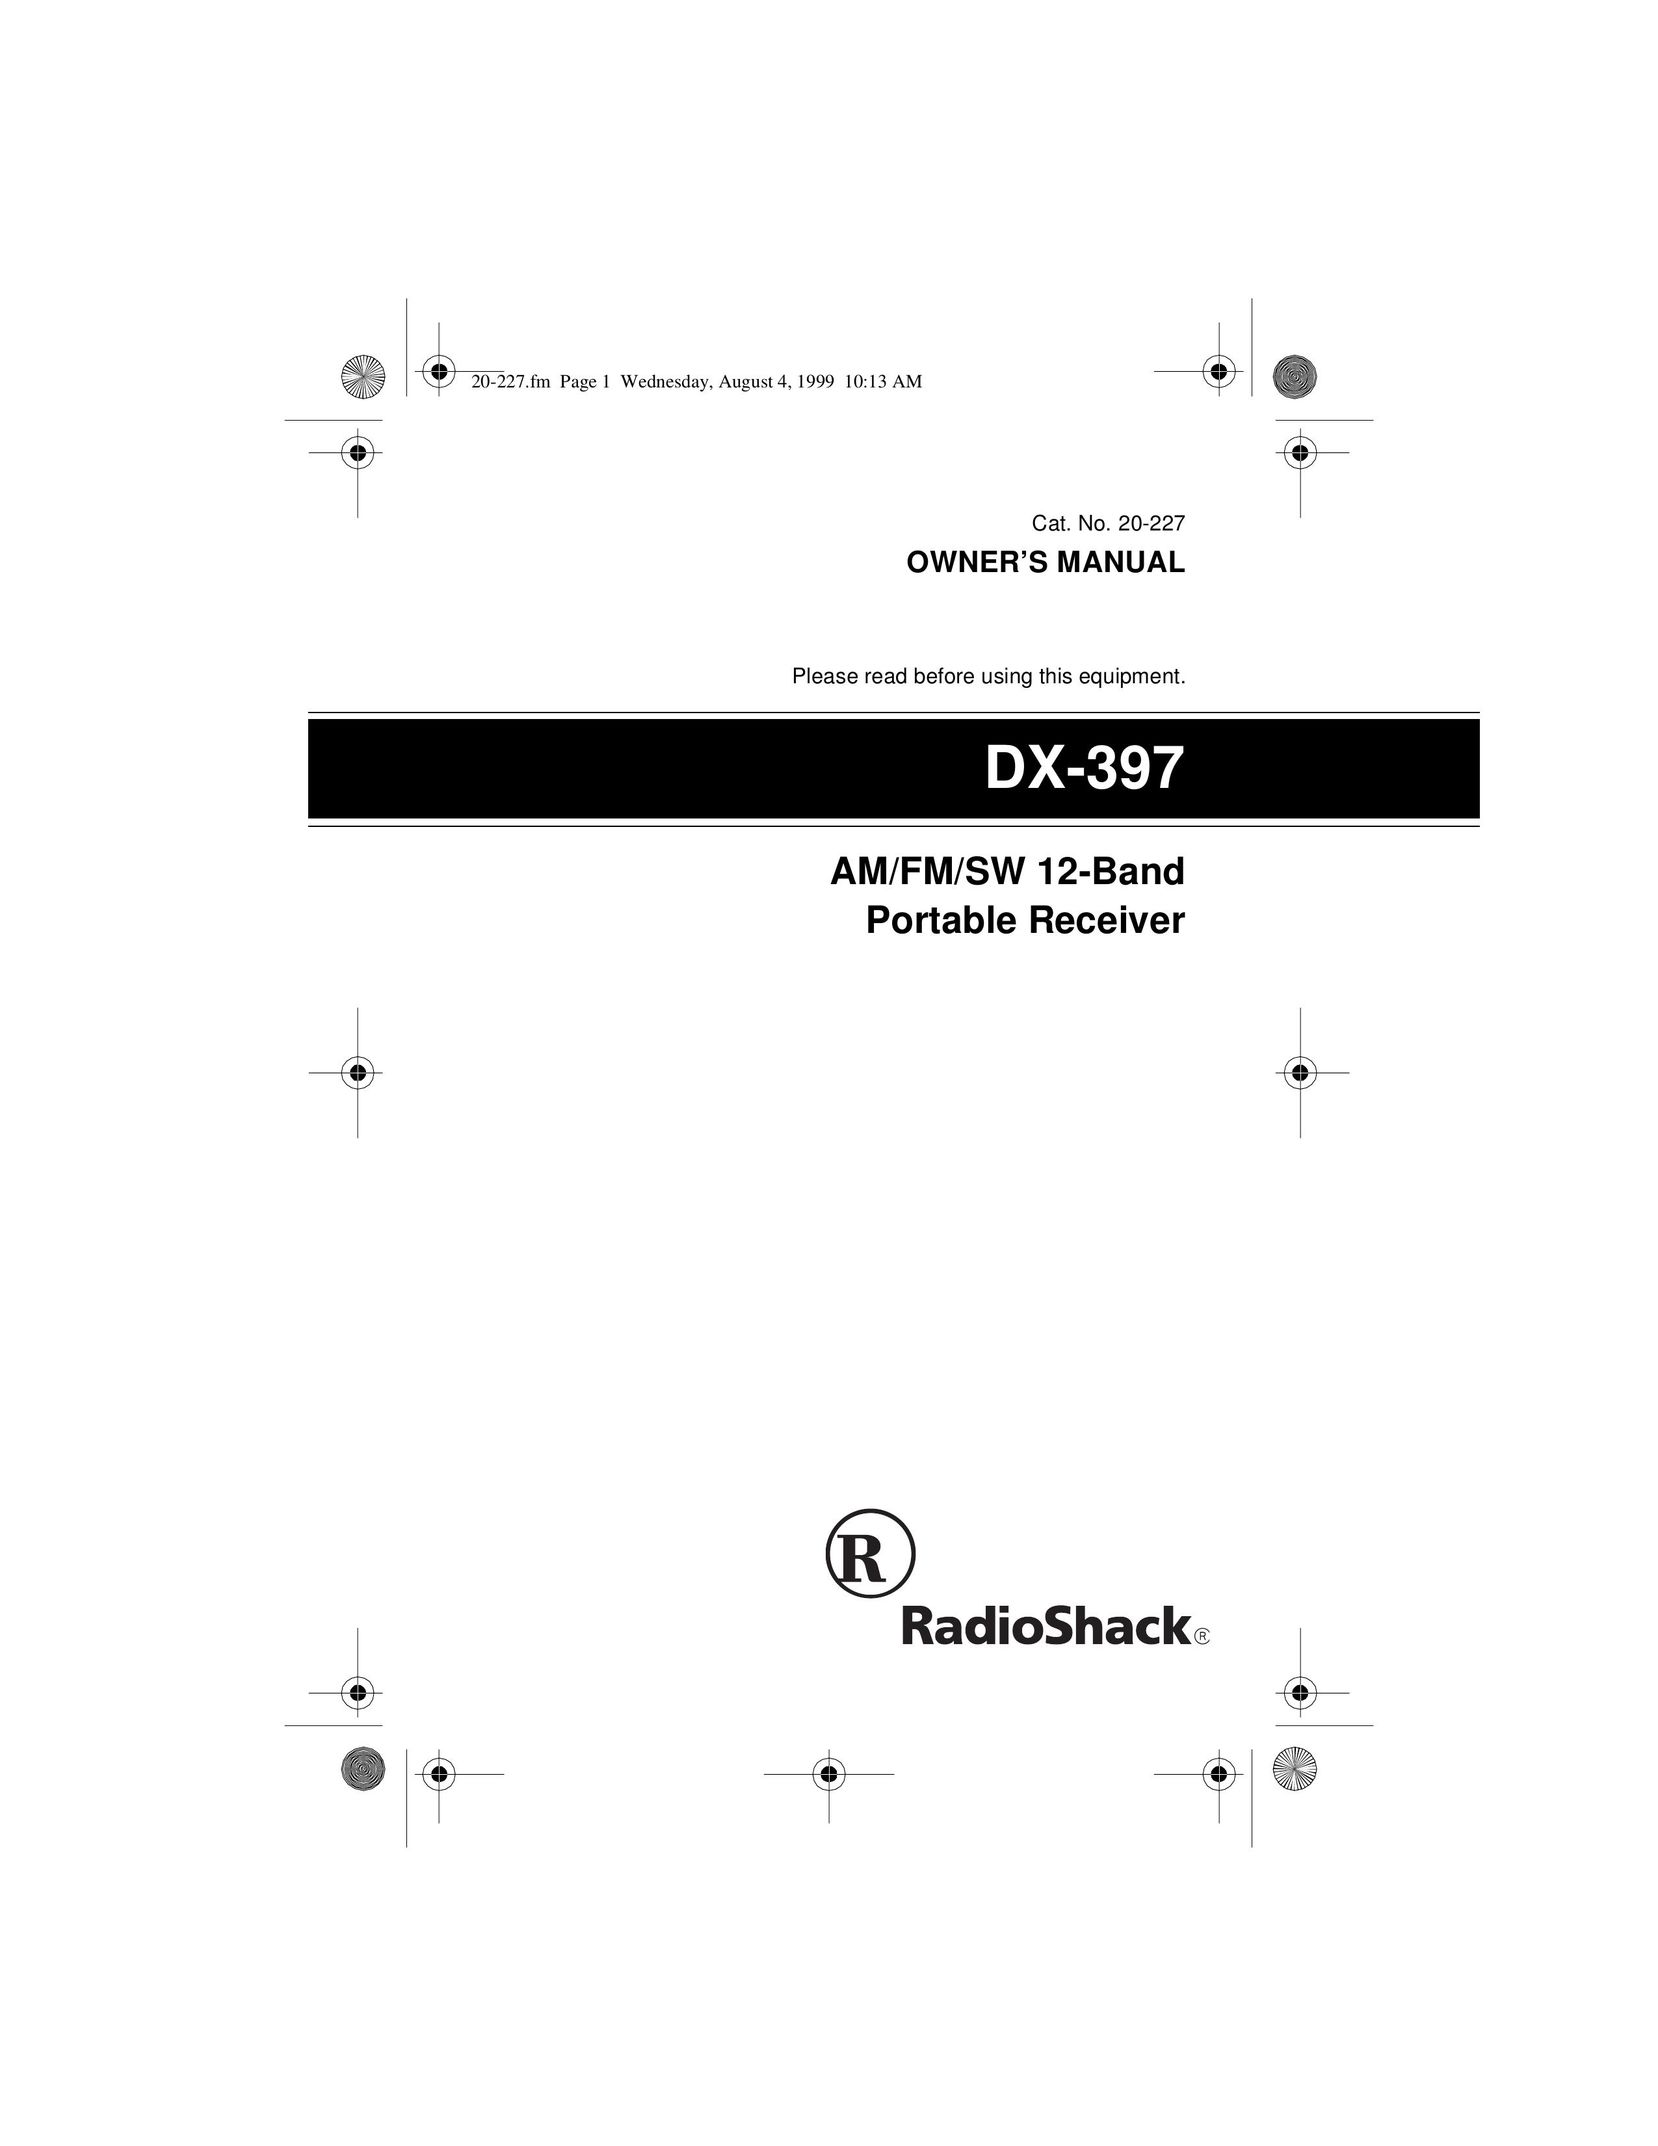 Radio Shack DX-397 Stereo Receiver User Manual